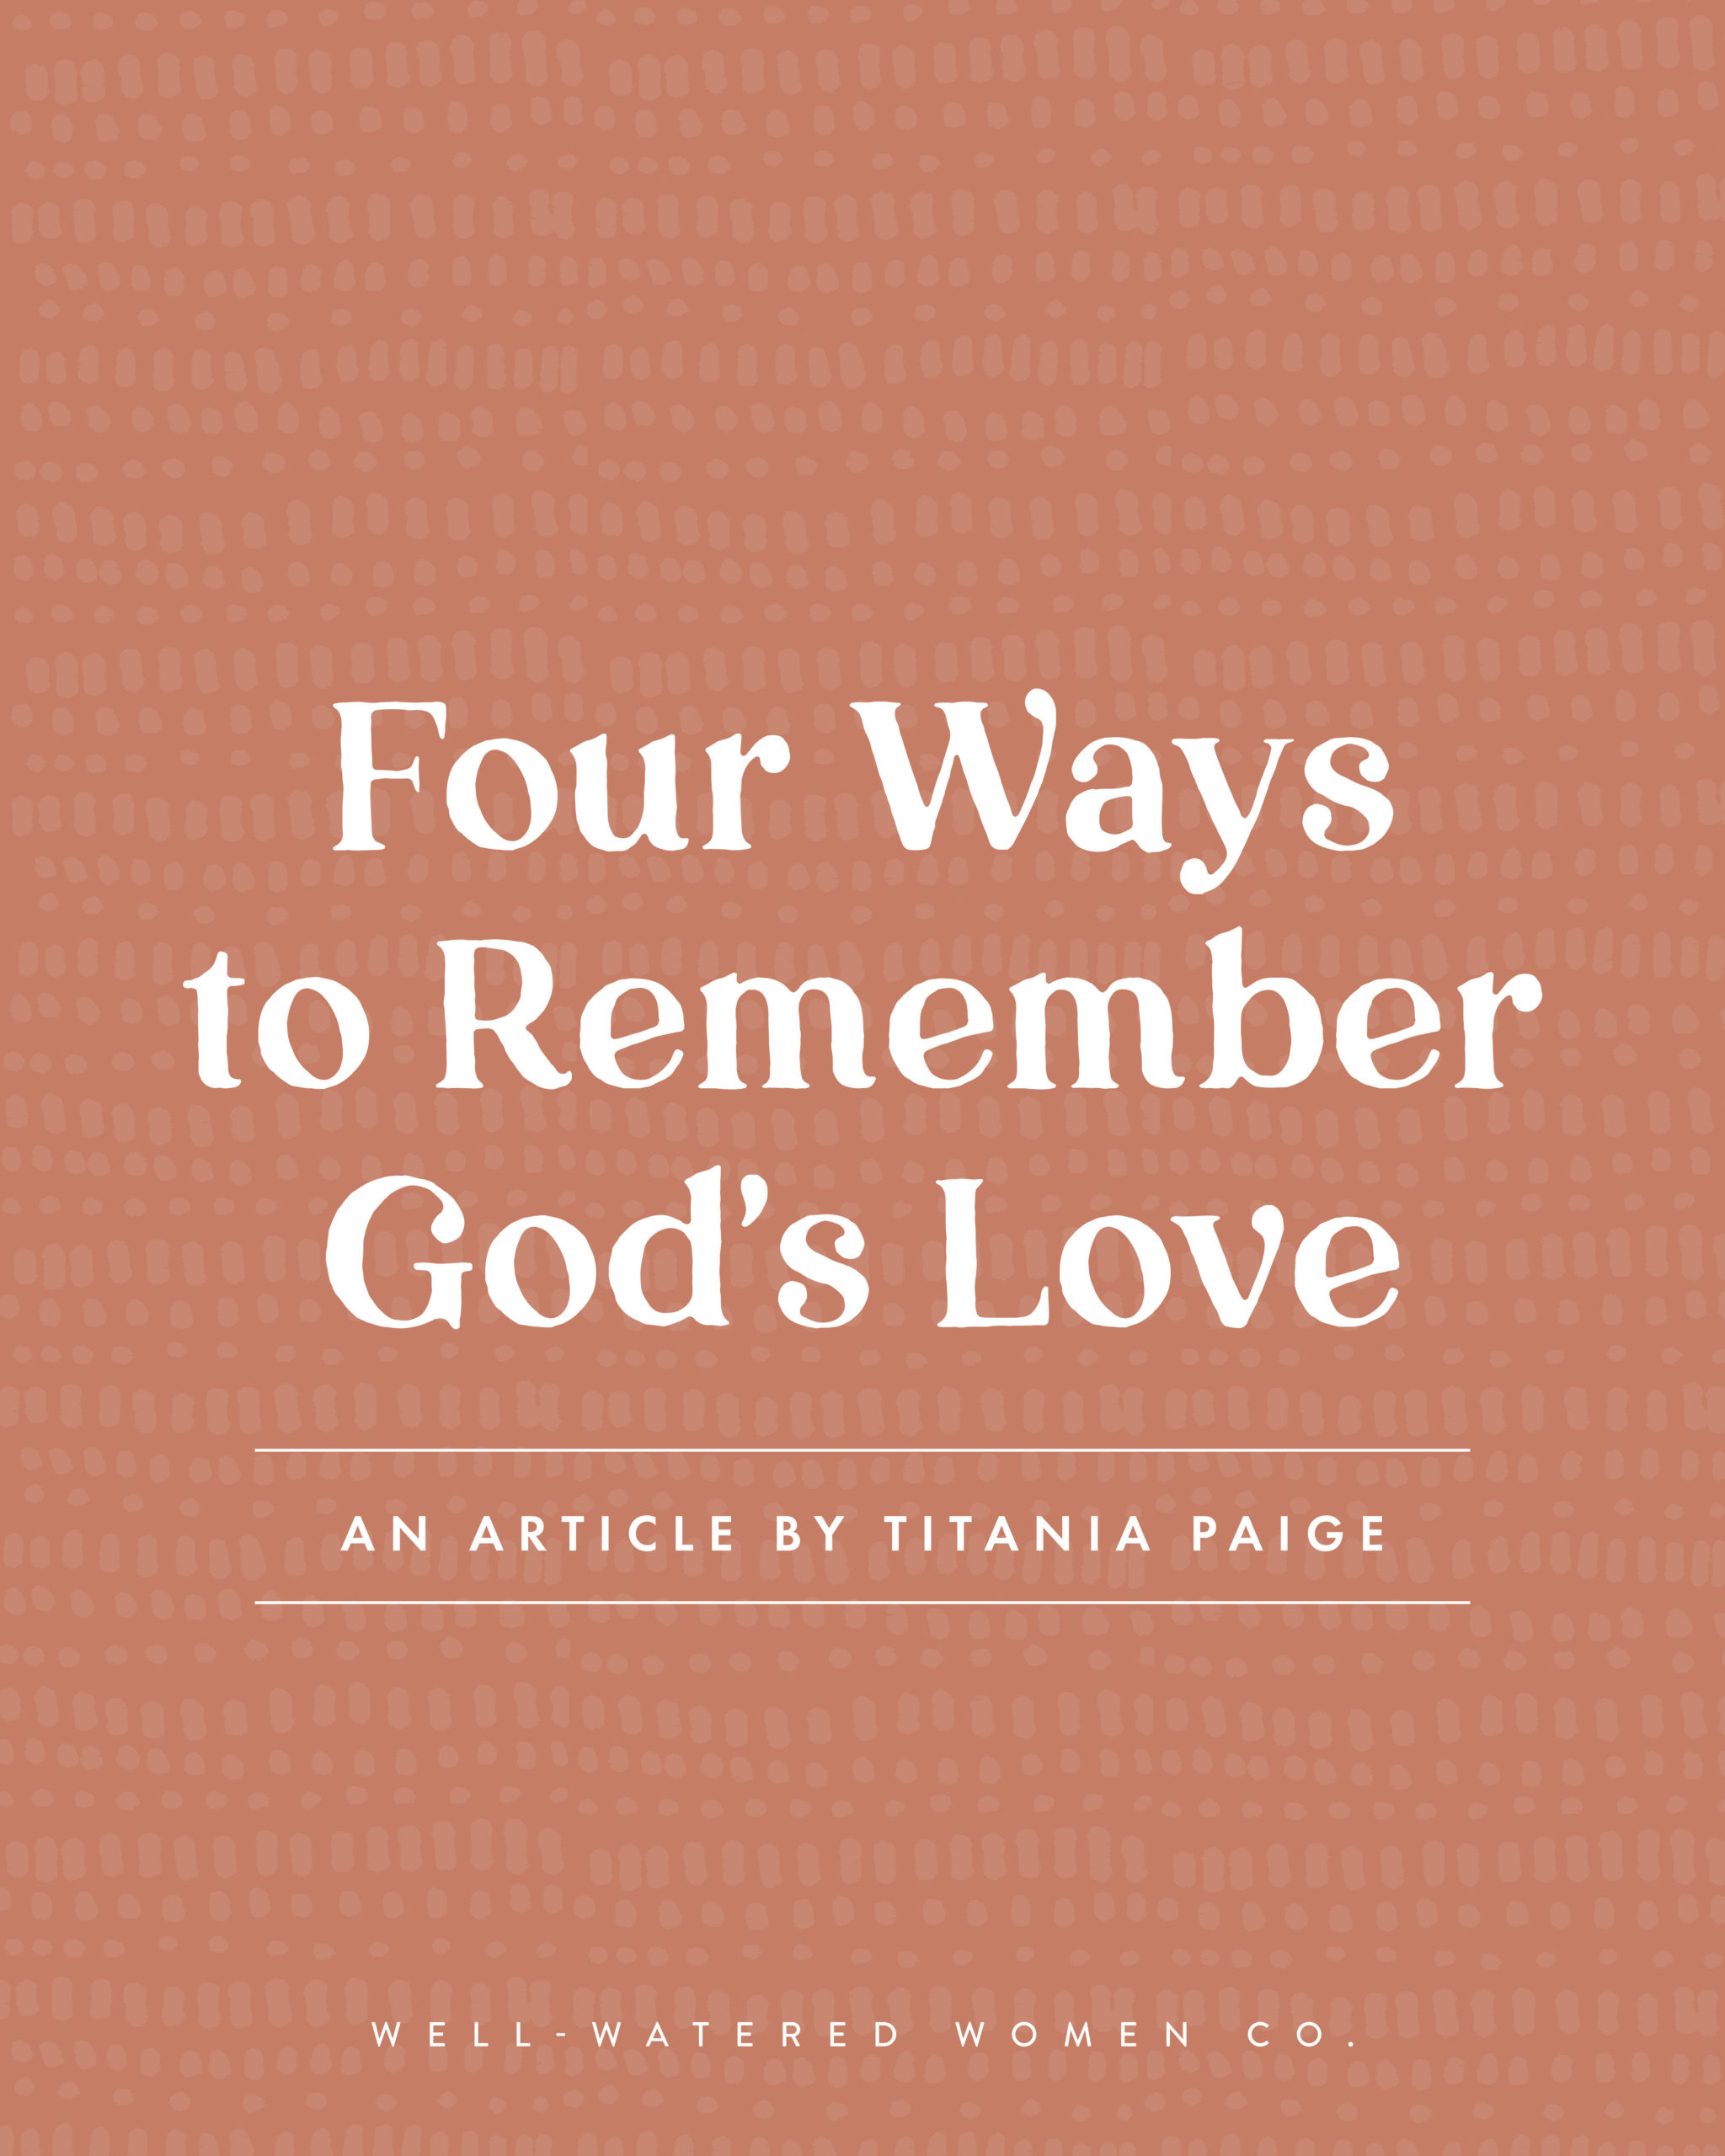 Four Ways to Remember God's Love - an article from Well-Watered Women